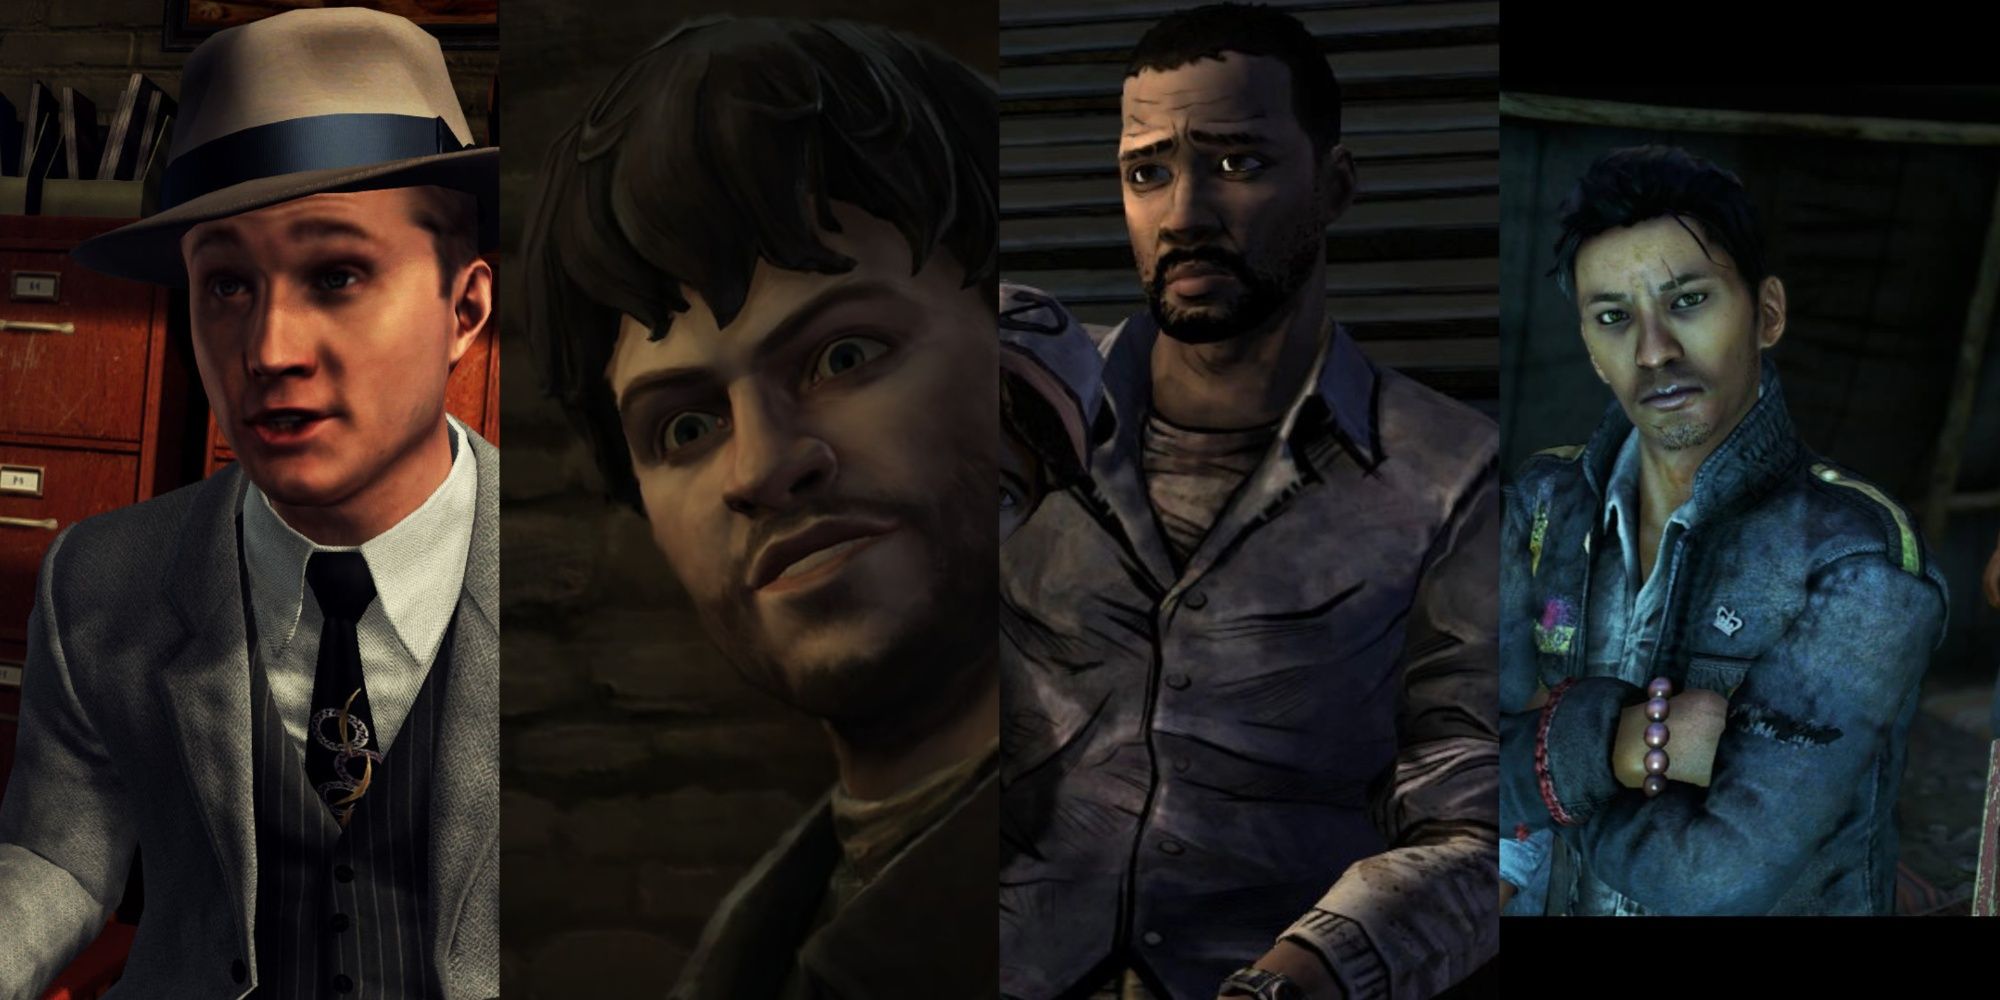 Collage Image of L.A. Noire, Game Of Thrones, The Walking Dead, and Far Cry 4.